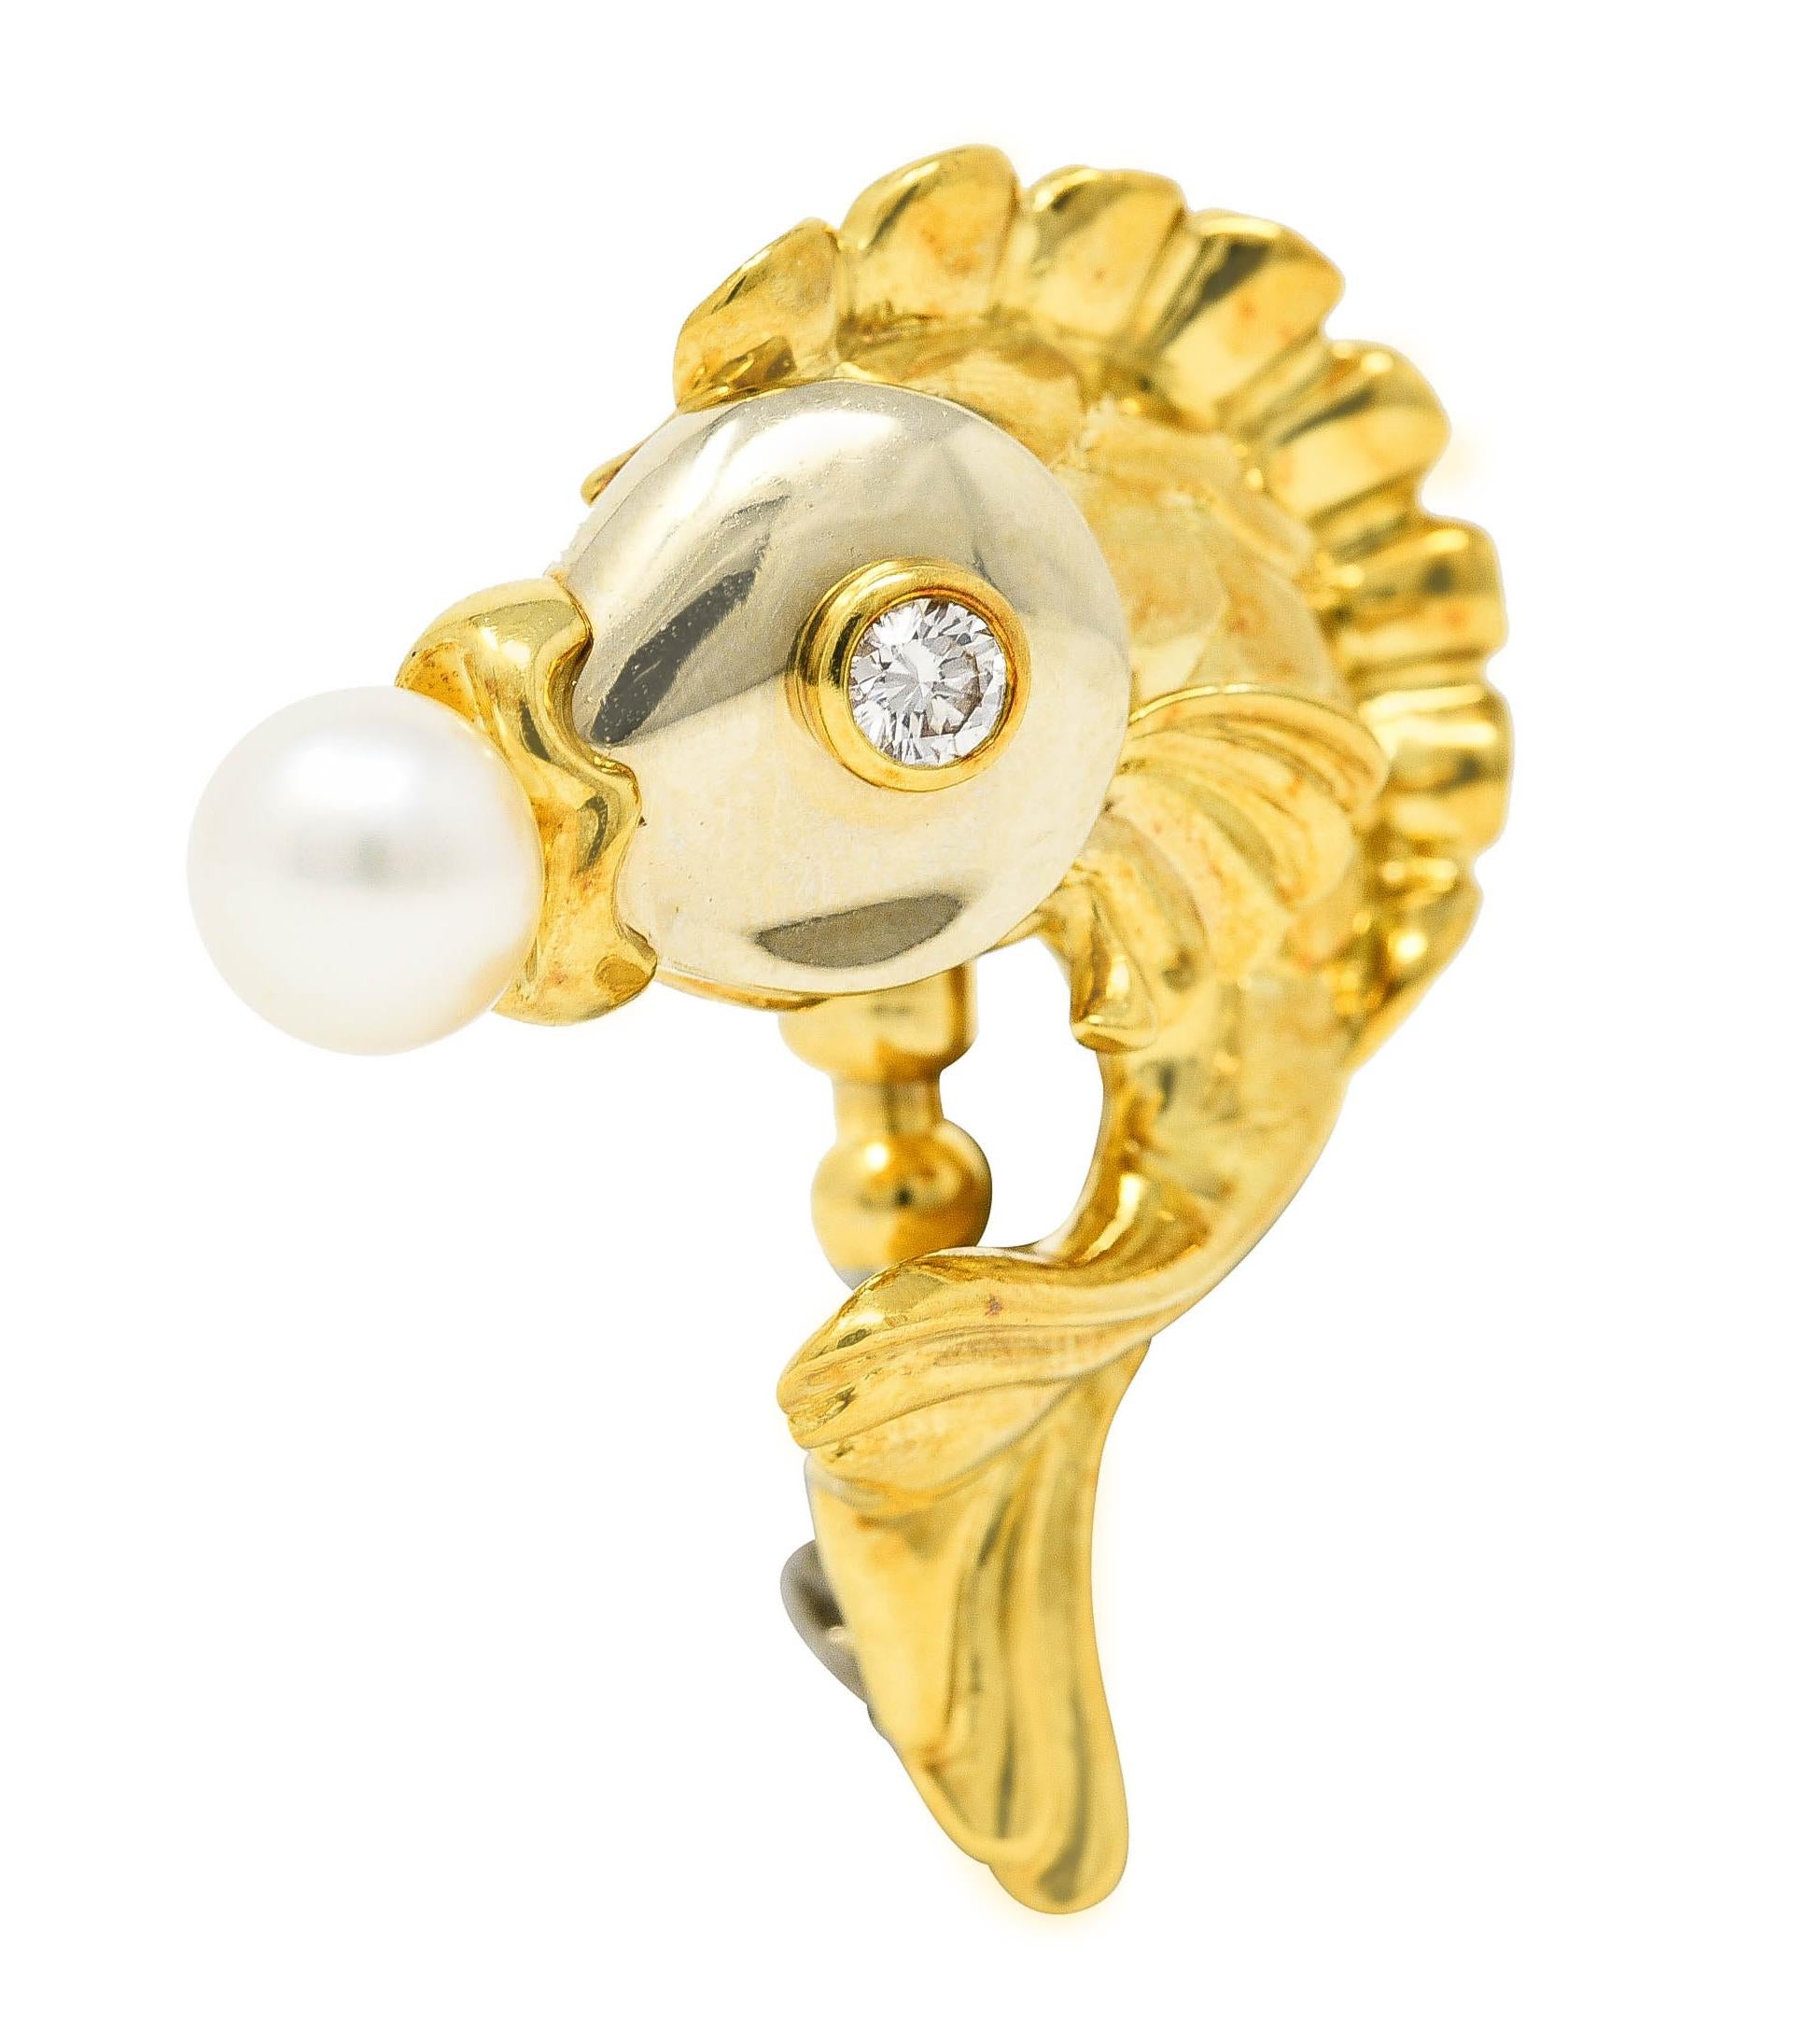 Designed as a stylized koi fish with a white gold face, puffed scales and fluted fins. Accented by a round brilliant cut diamond eye weighing approximately 0.14 carat total. Eye clean and bright - set in a yellow gold bezel. Accented by a 7.5 mm